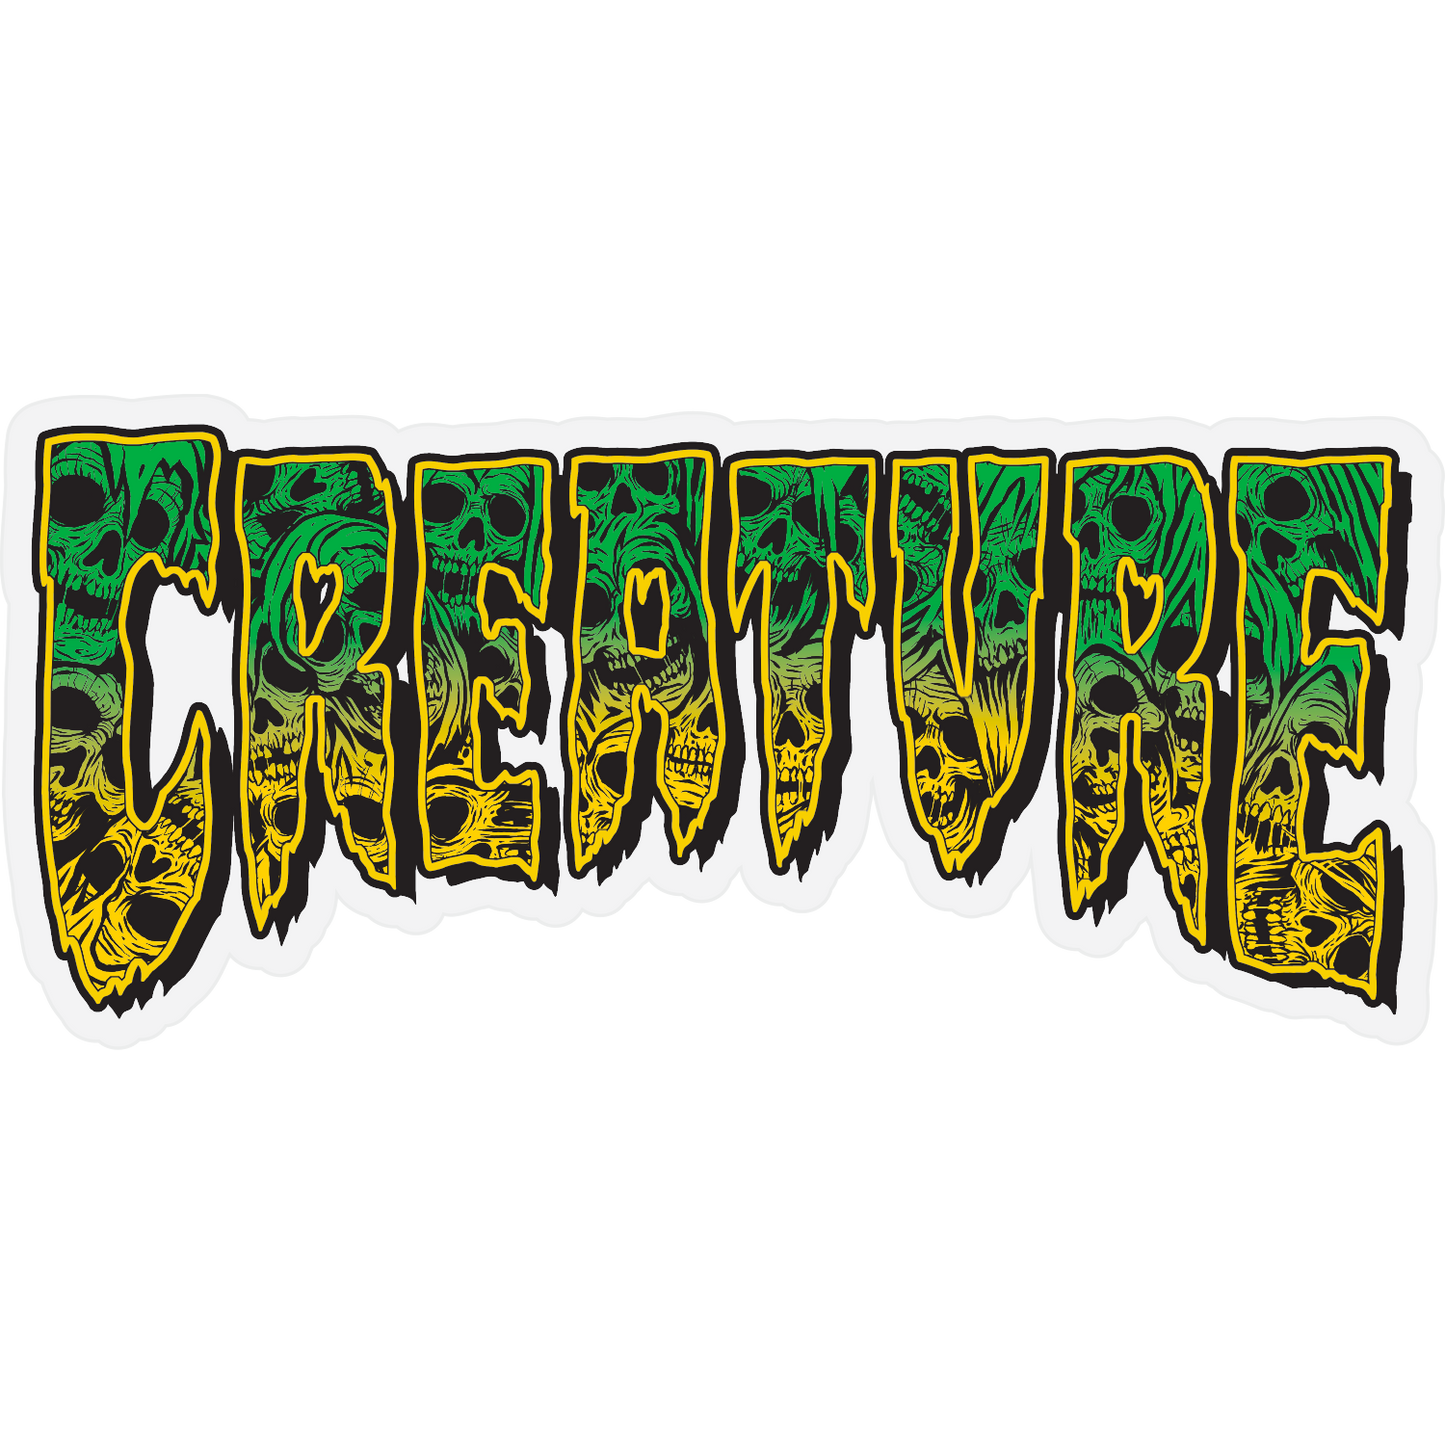 Creature Catacomb Sticker Green and Yellow 6.25" X 2.83"